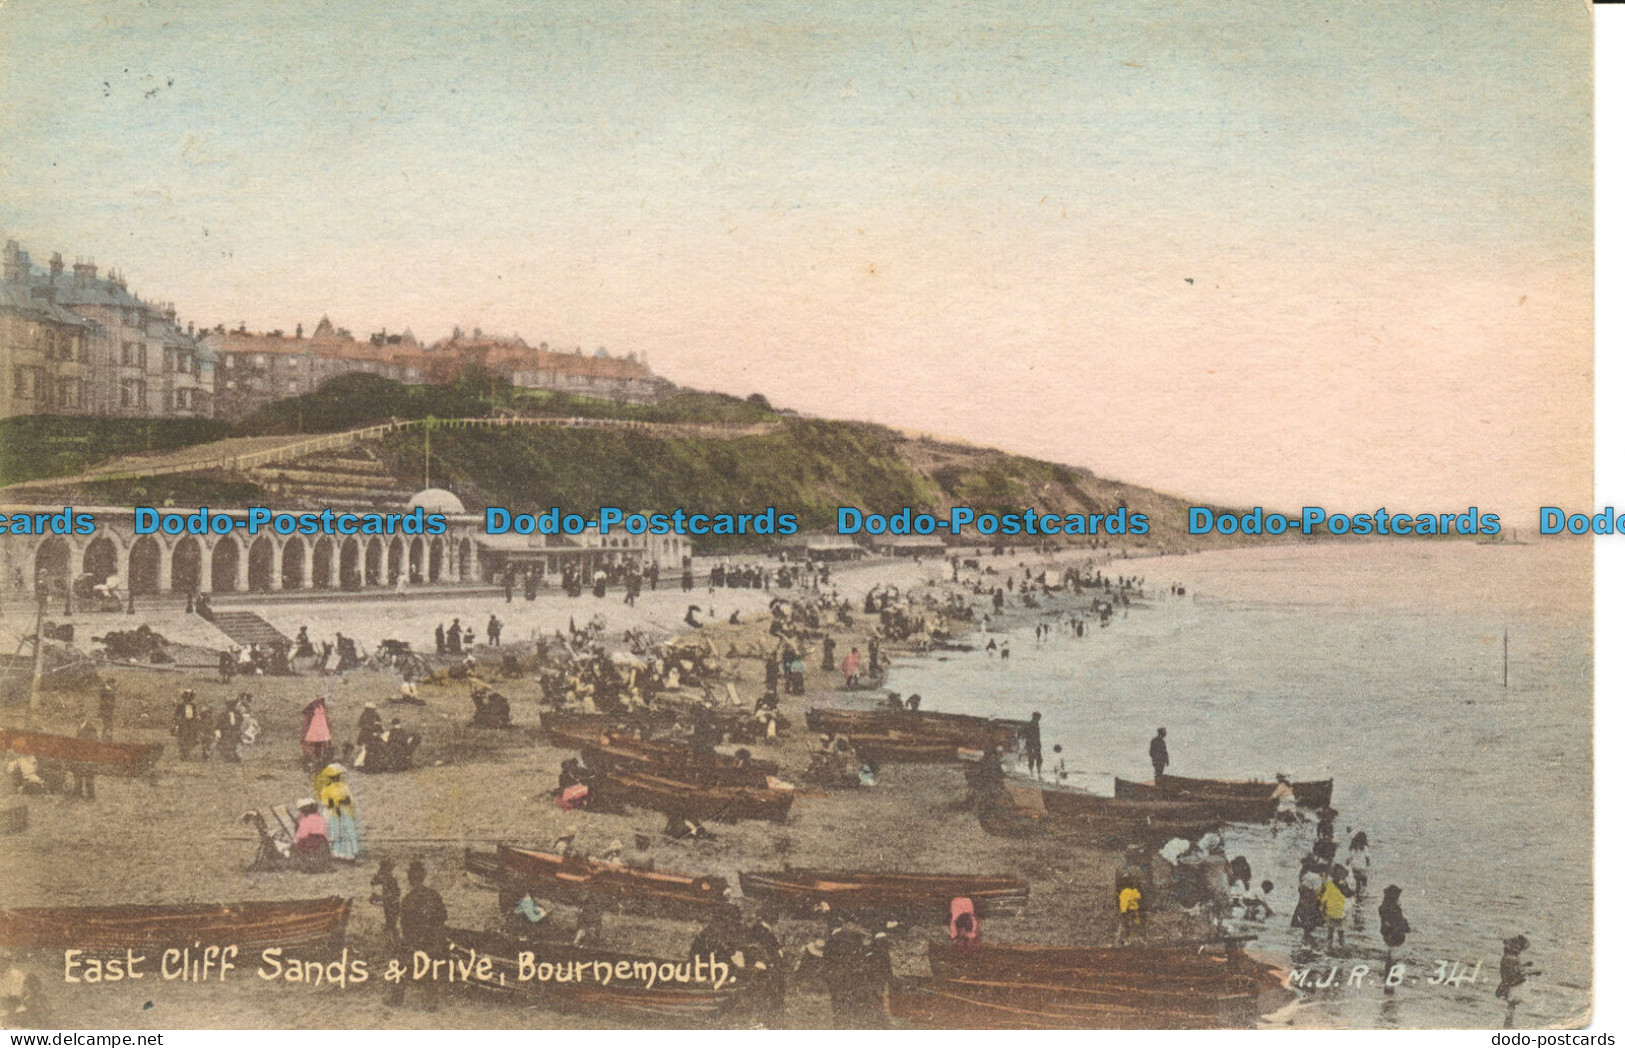 R103529 East Cliff Sands And Drive. Bournemouth. M. J. R. B. 341. 1910 - Monde